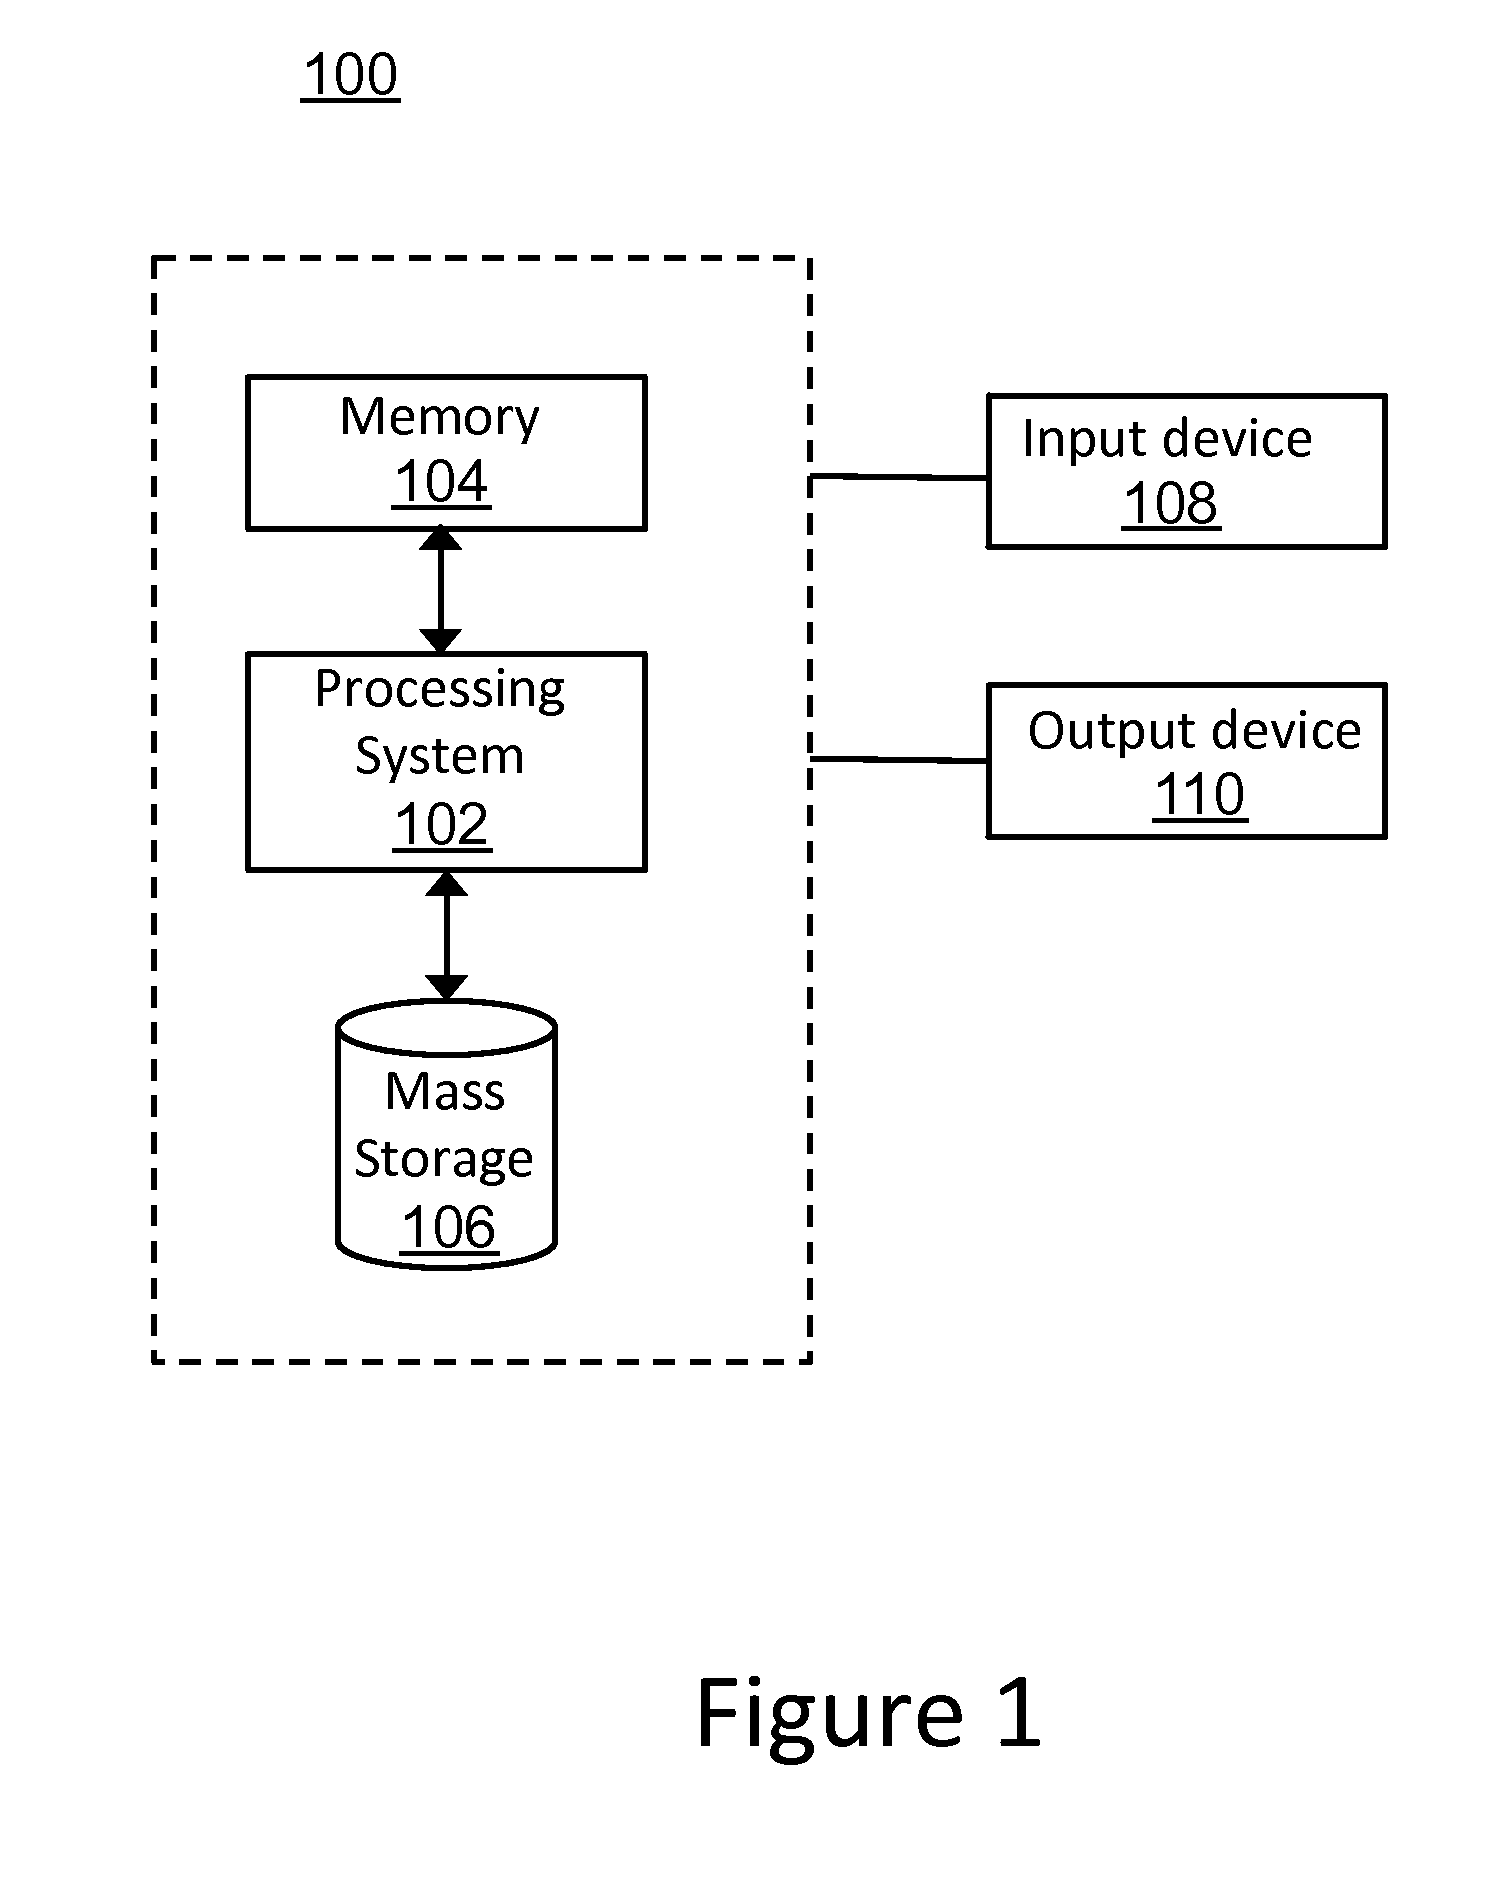 Method for propagating information between a building information model and a specification document